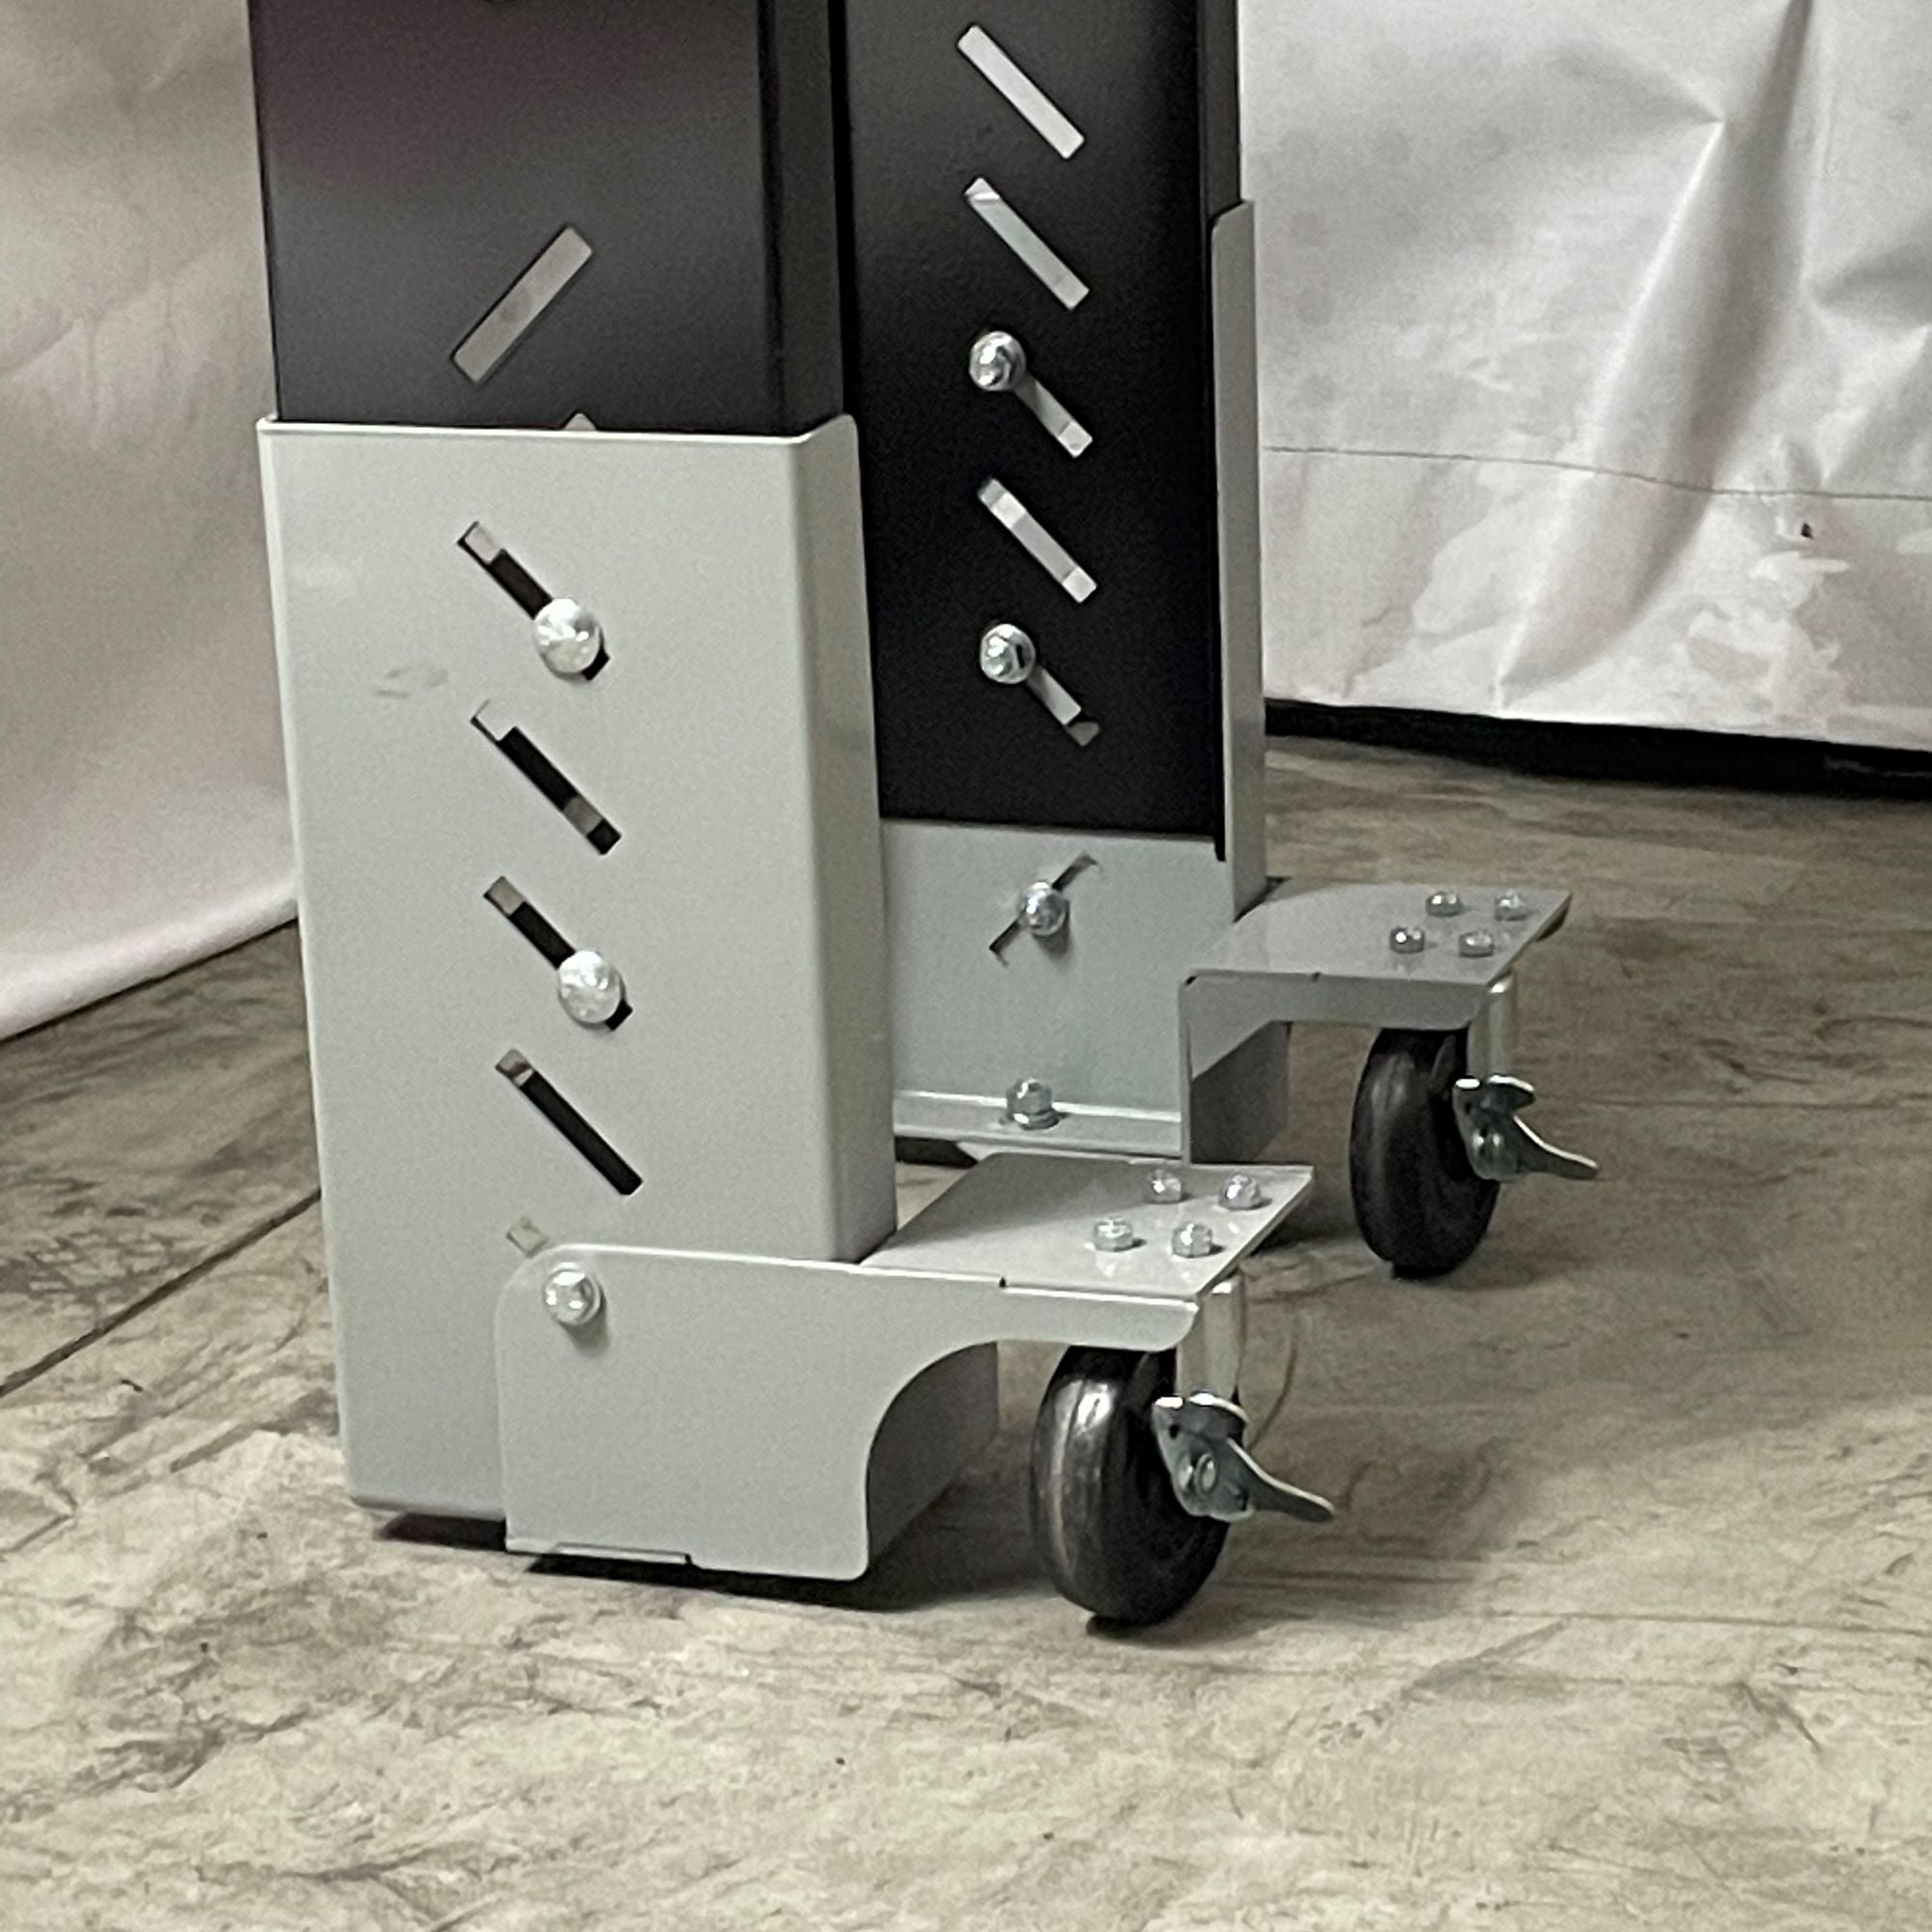 MOBILE BASE FOR EXTENSION TABLES – Williams & Hussey Machine and Tool Co.